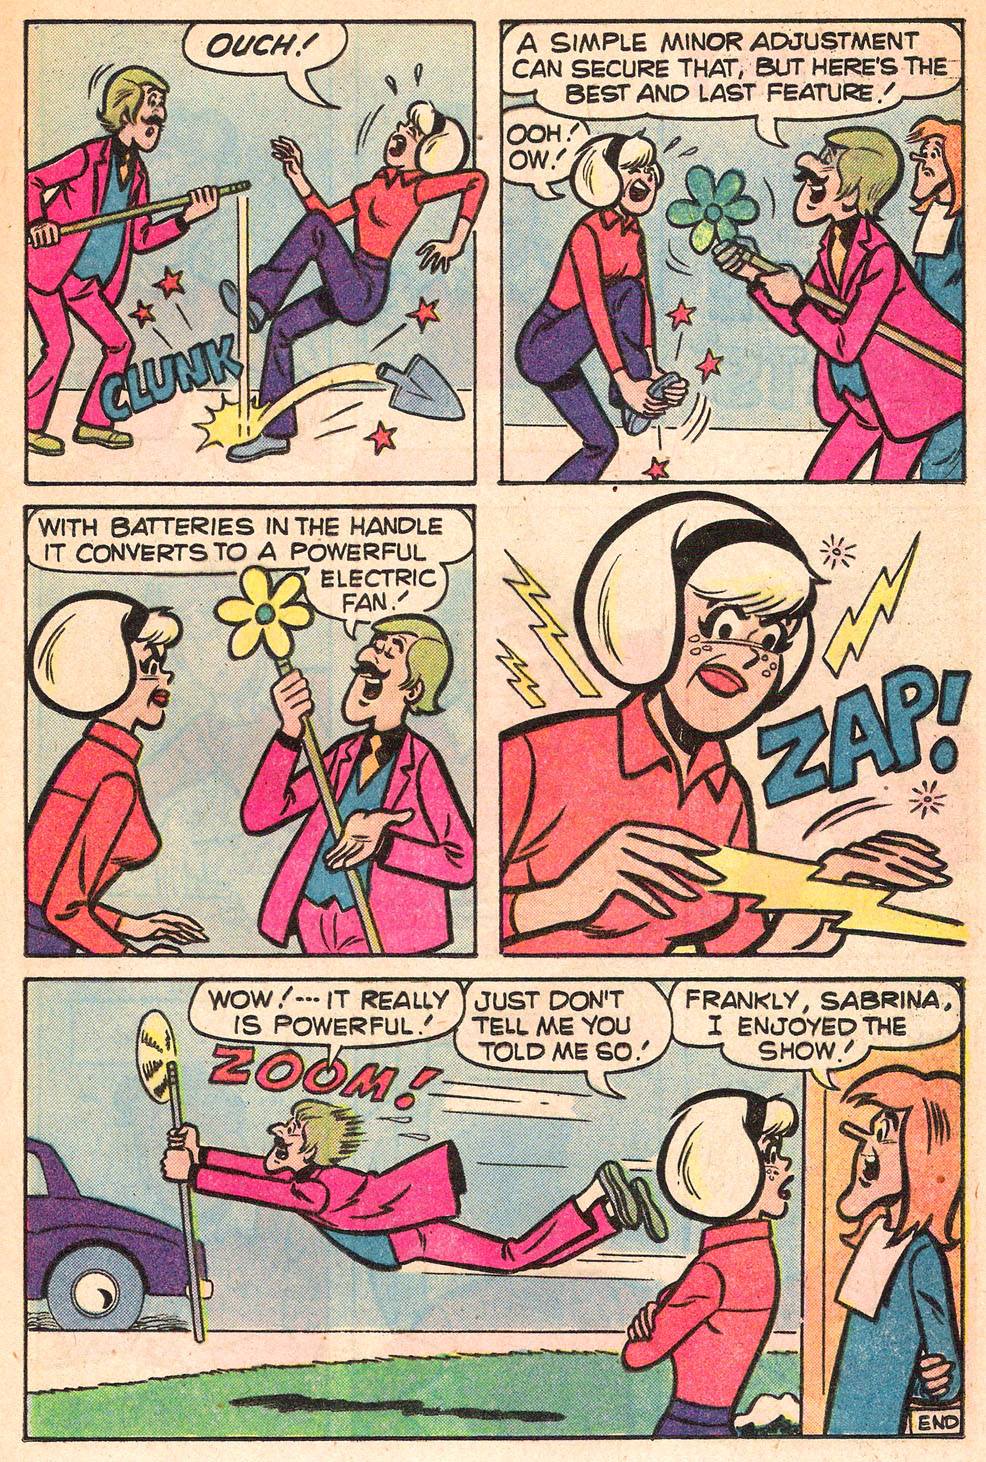 Sabrina The Teenage Witch (1971) Issue #53 #53 - English 17